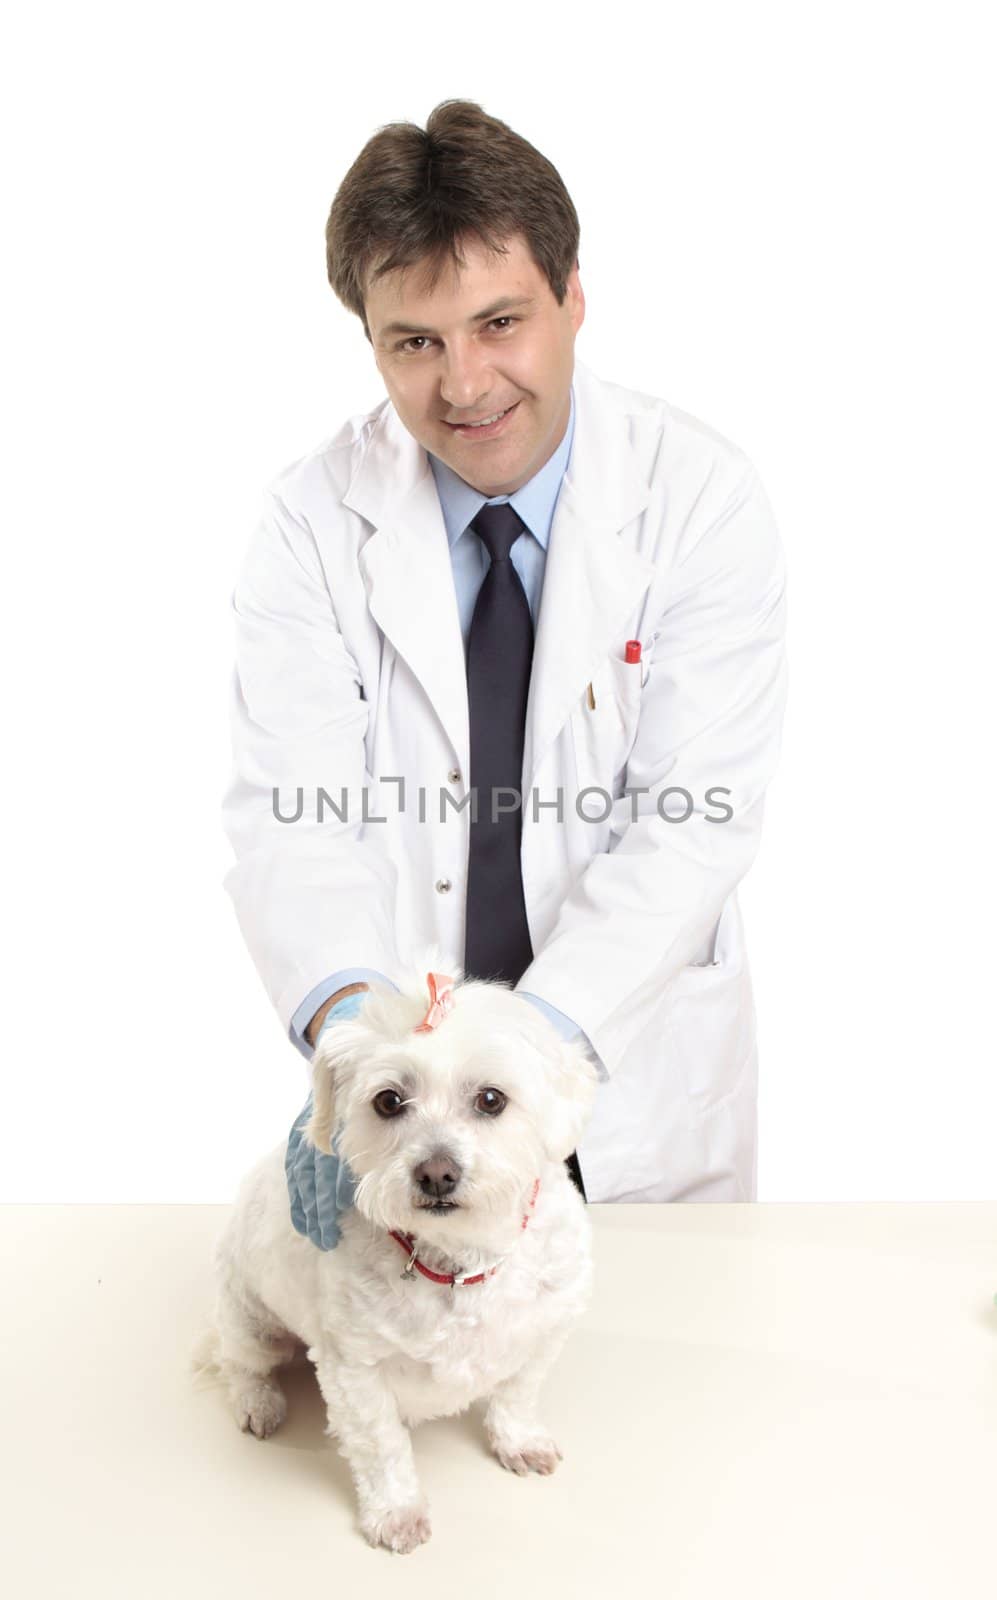 Smiling vet holding a pet dog on a treatment table.